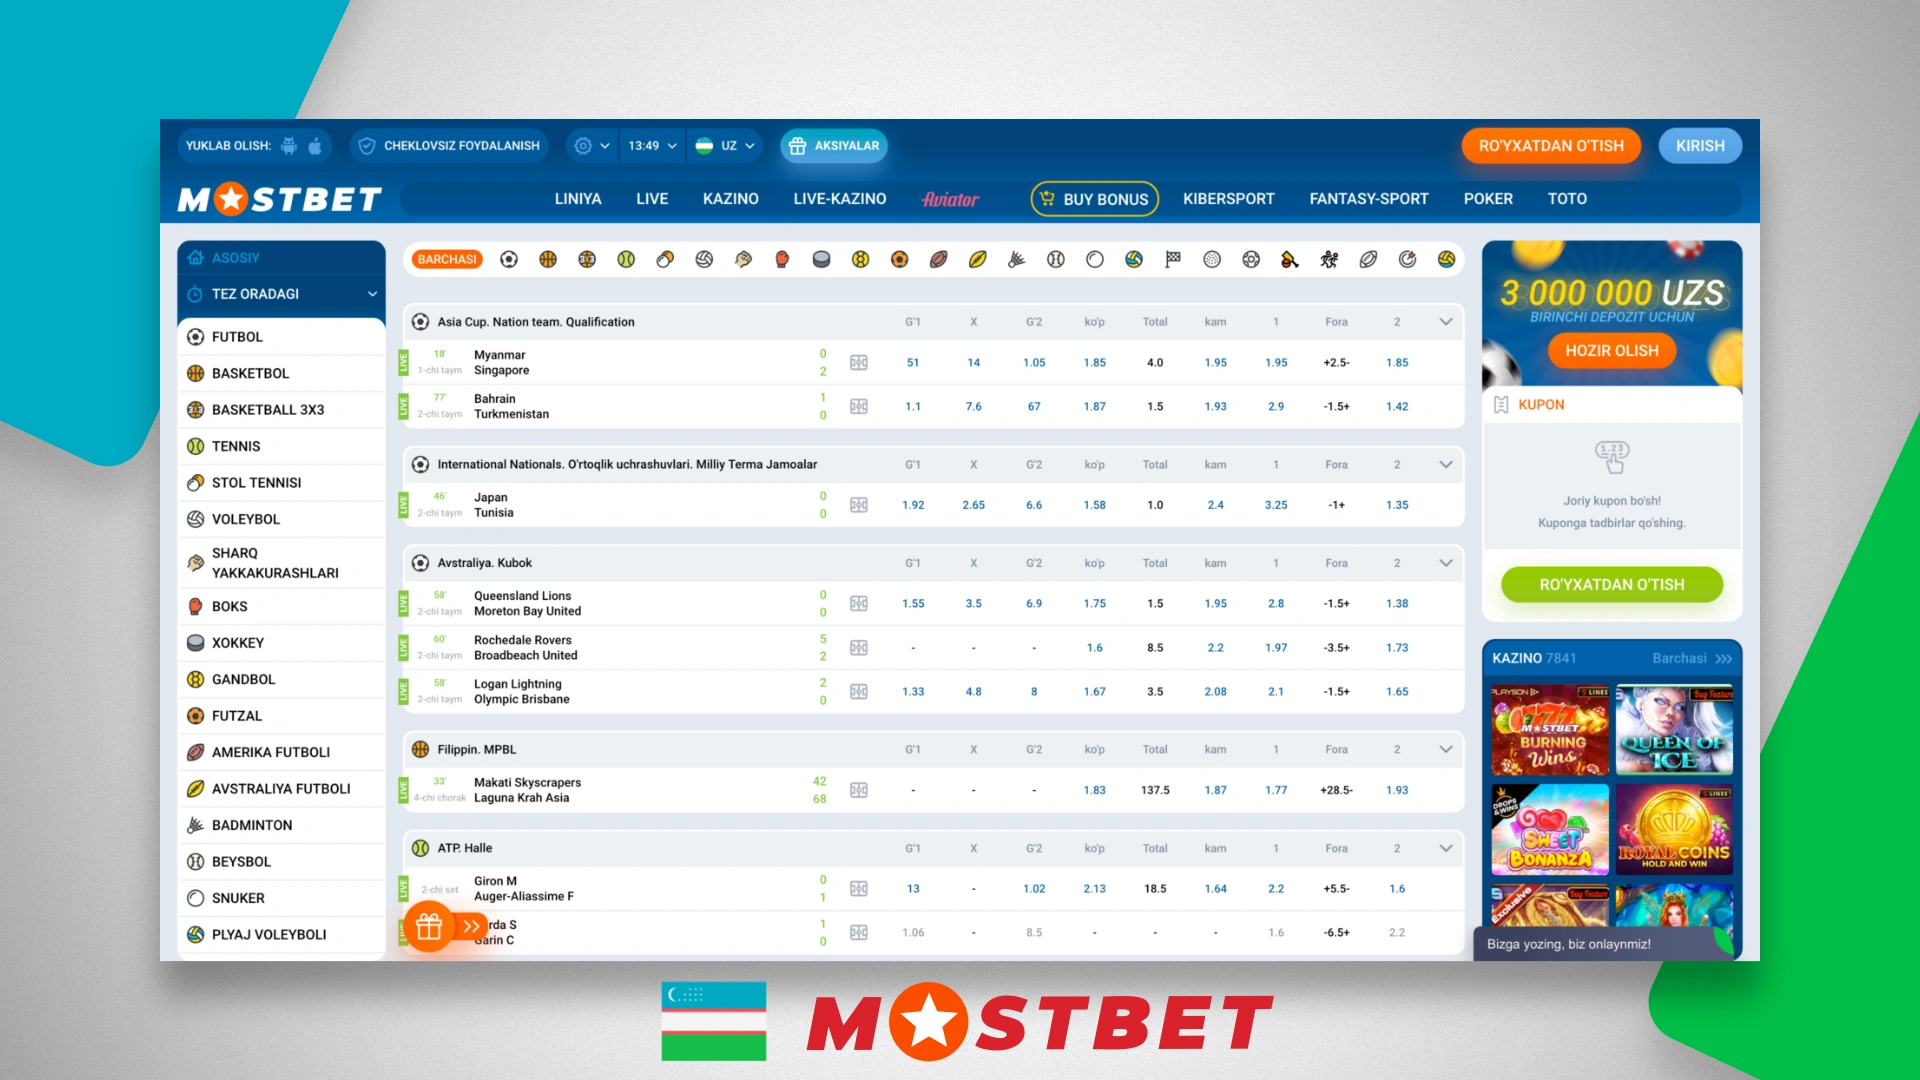 Main page Mostbet Uzbekistan for sports betting